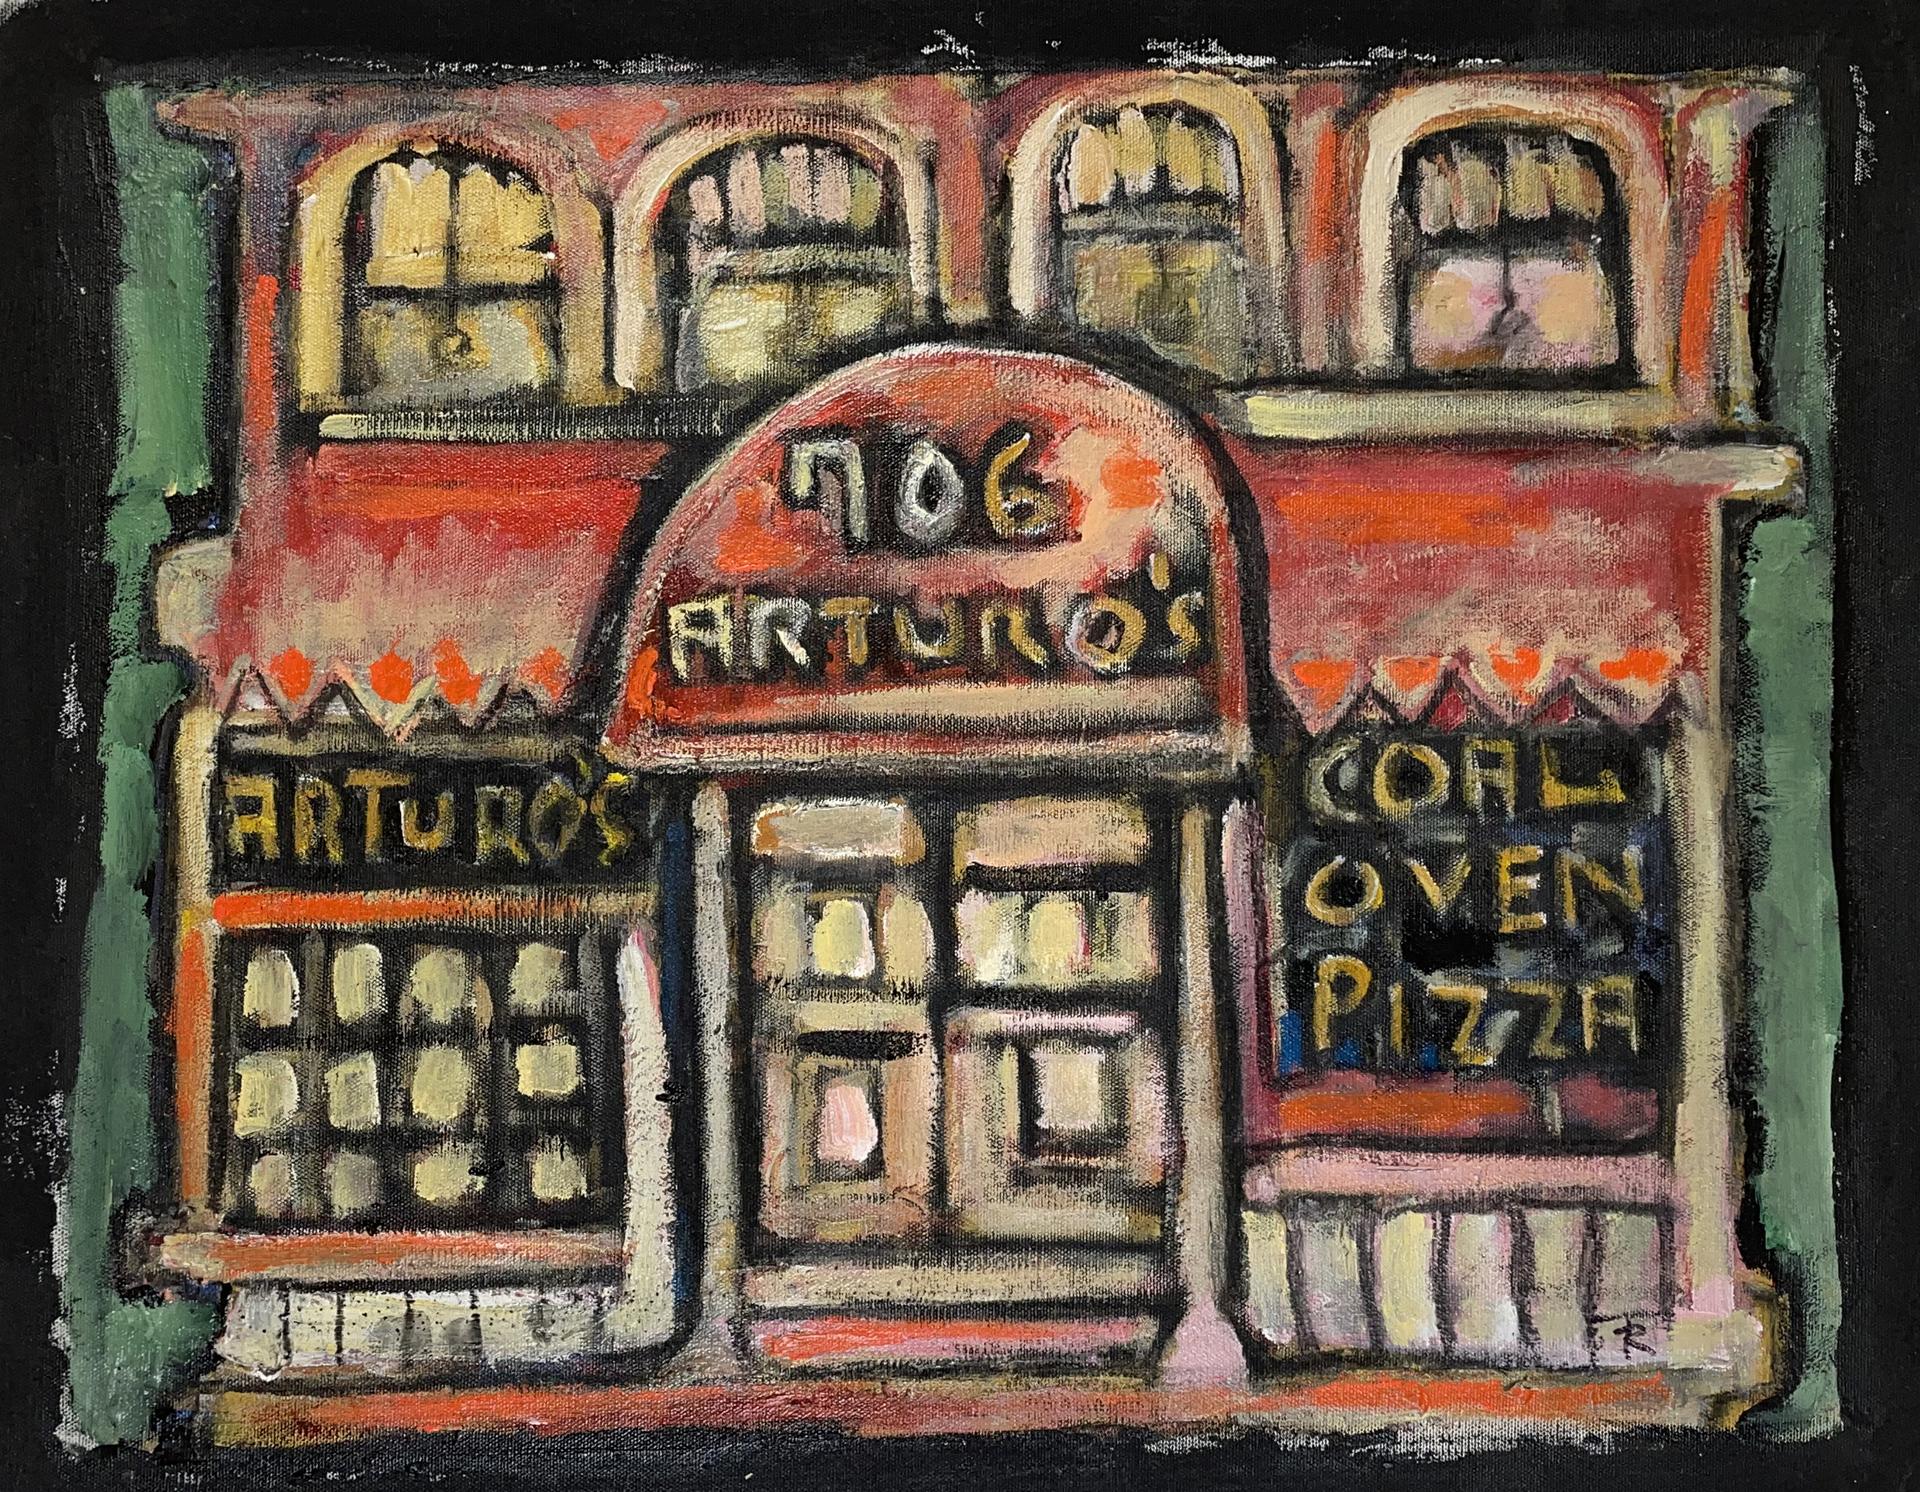 Tom Russell, Arturo's coal-oven pizza 706 W Houston, NYC, 2018, acrylic on canvas, 45x40 cm